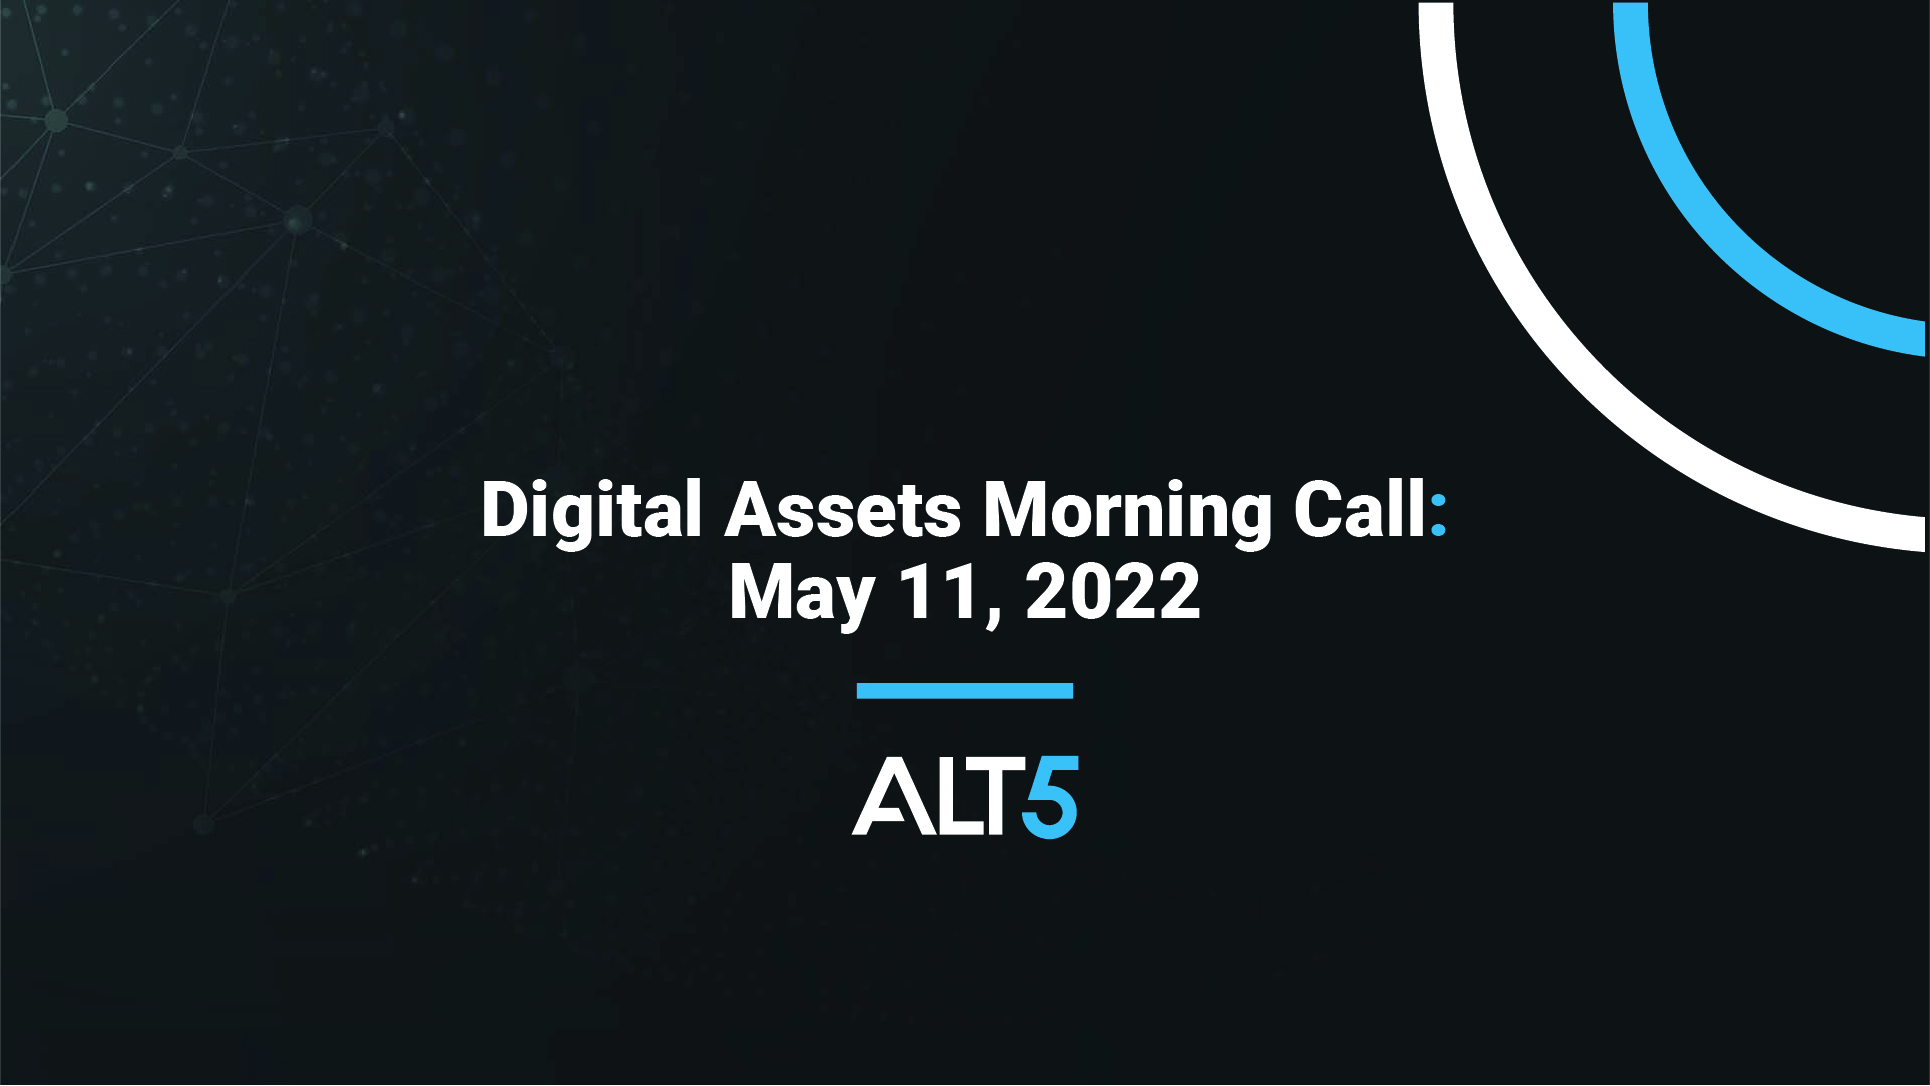 Digital Assets Morning Call: May 11 2022 - Crypto assets resume decline, pressured by still-high US inflation